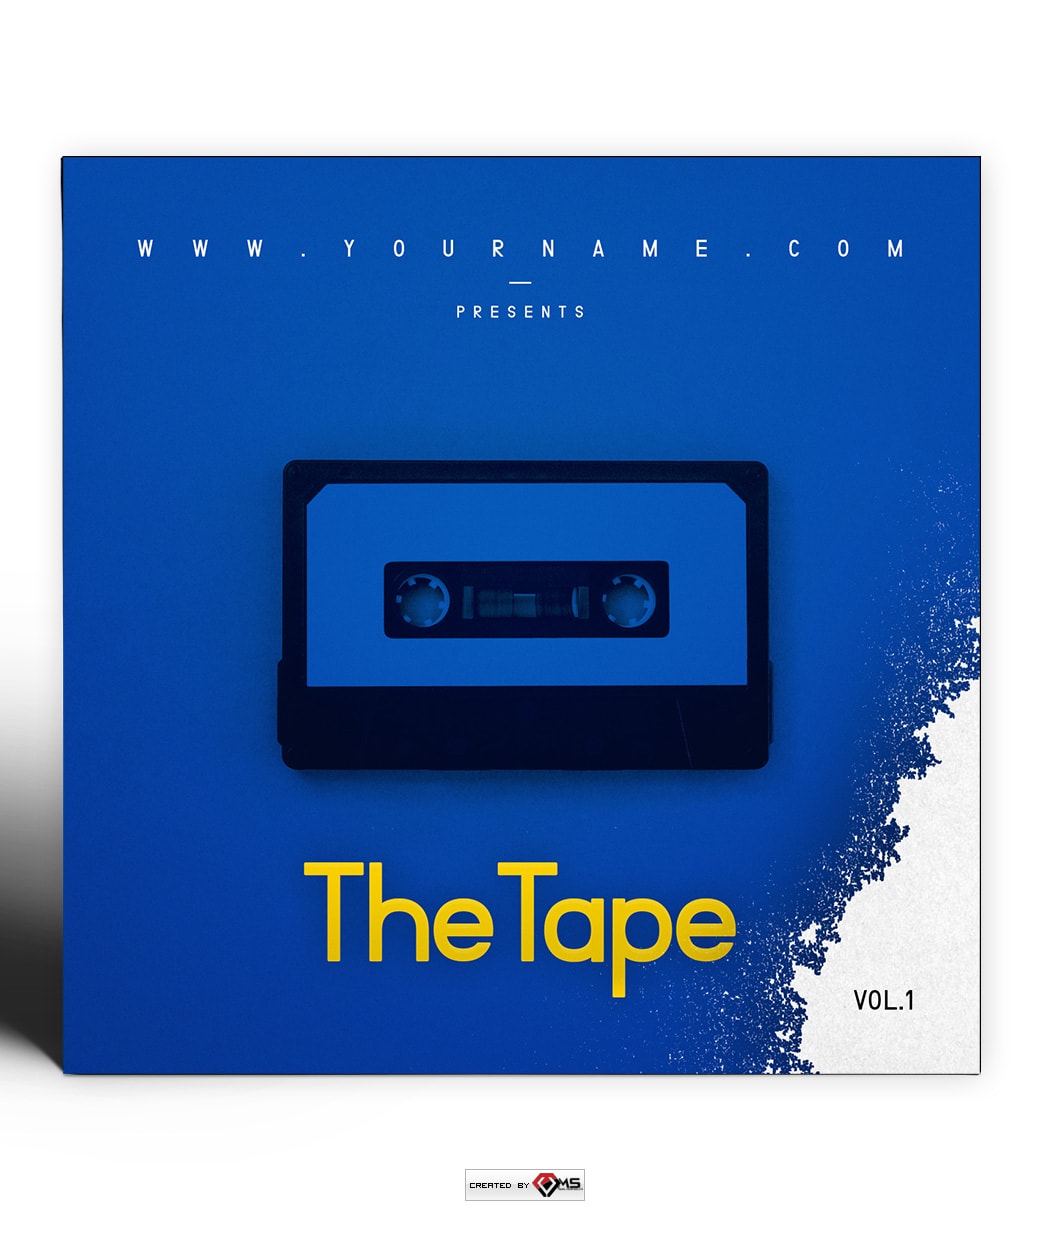 The Tape premade Mixtape Cover